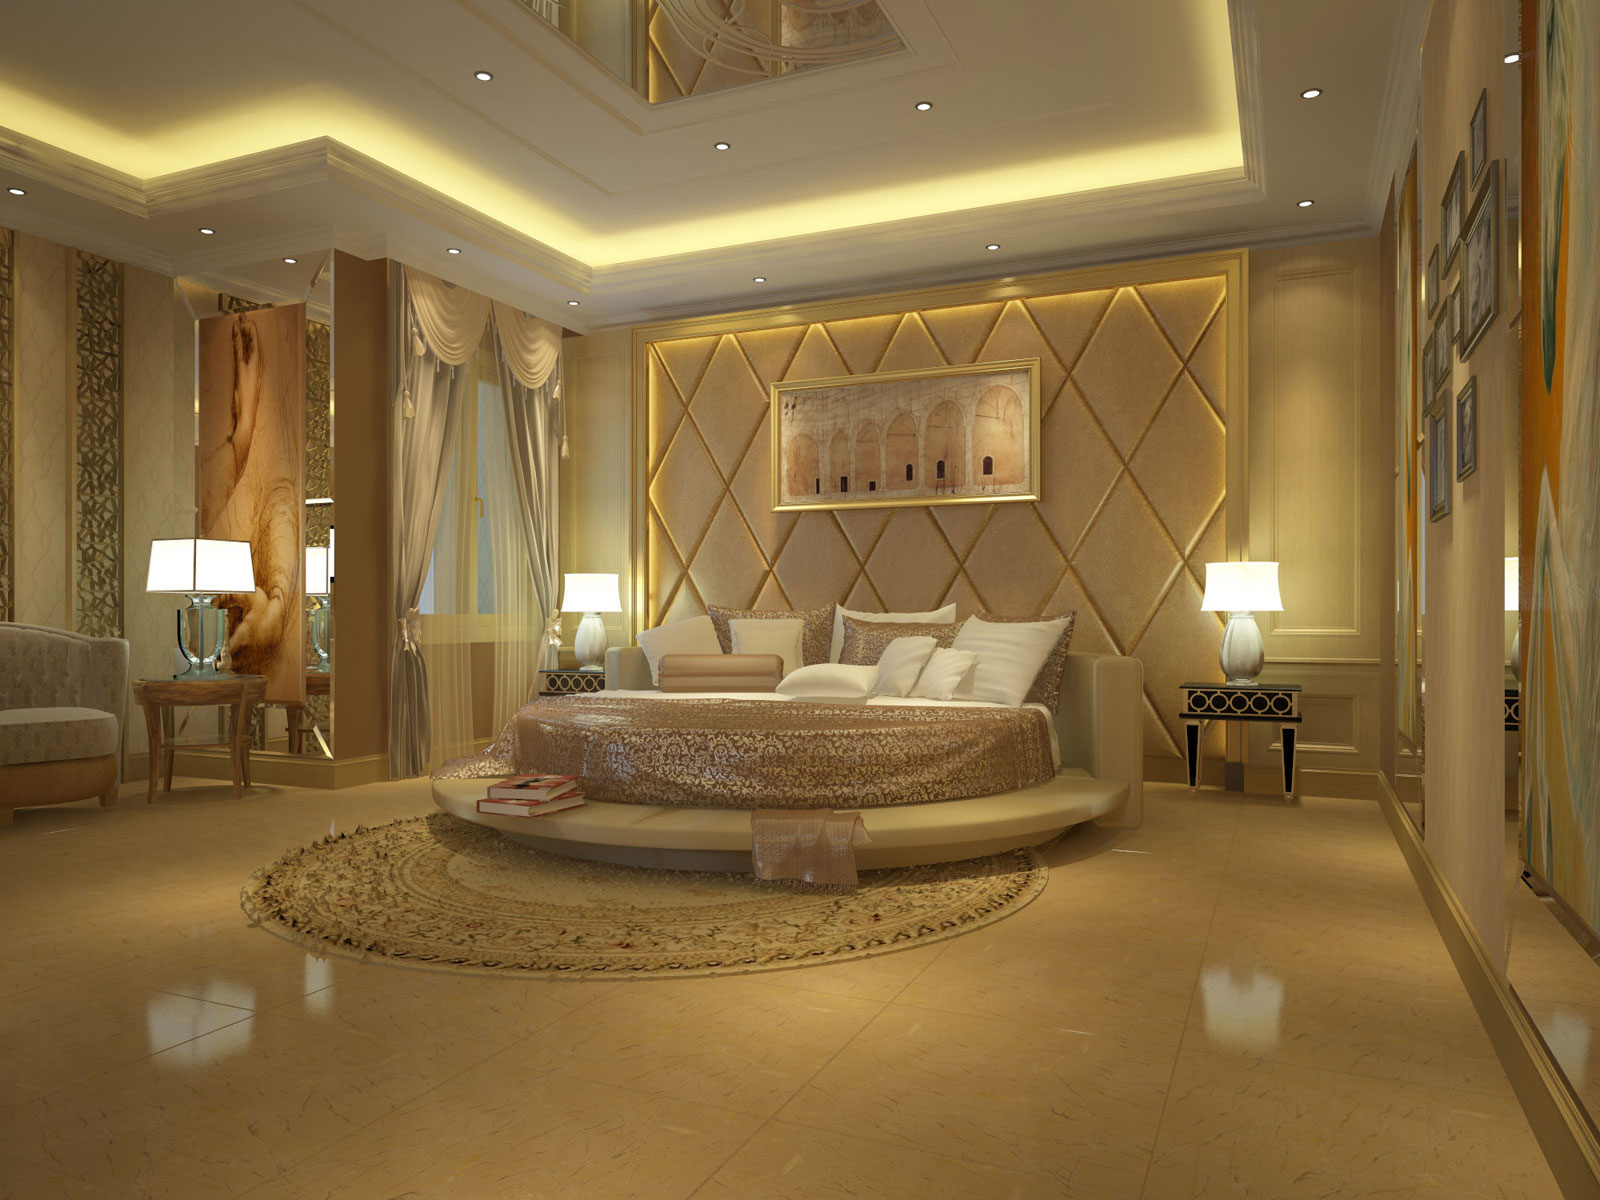 Queen Bedroom Gold Amazing Queen Bedroom Cream And Gold Painted Wall Apropos To Bedroom Ceiling Lights Bedroom Beautiful Bedroom Ceiling Lights Your Stunning Home Needs